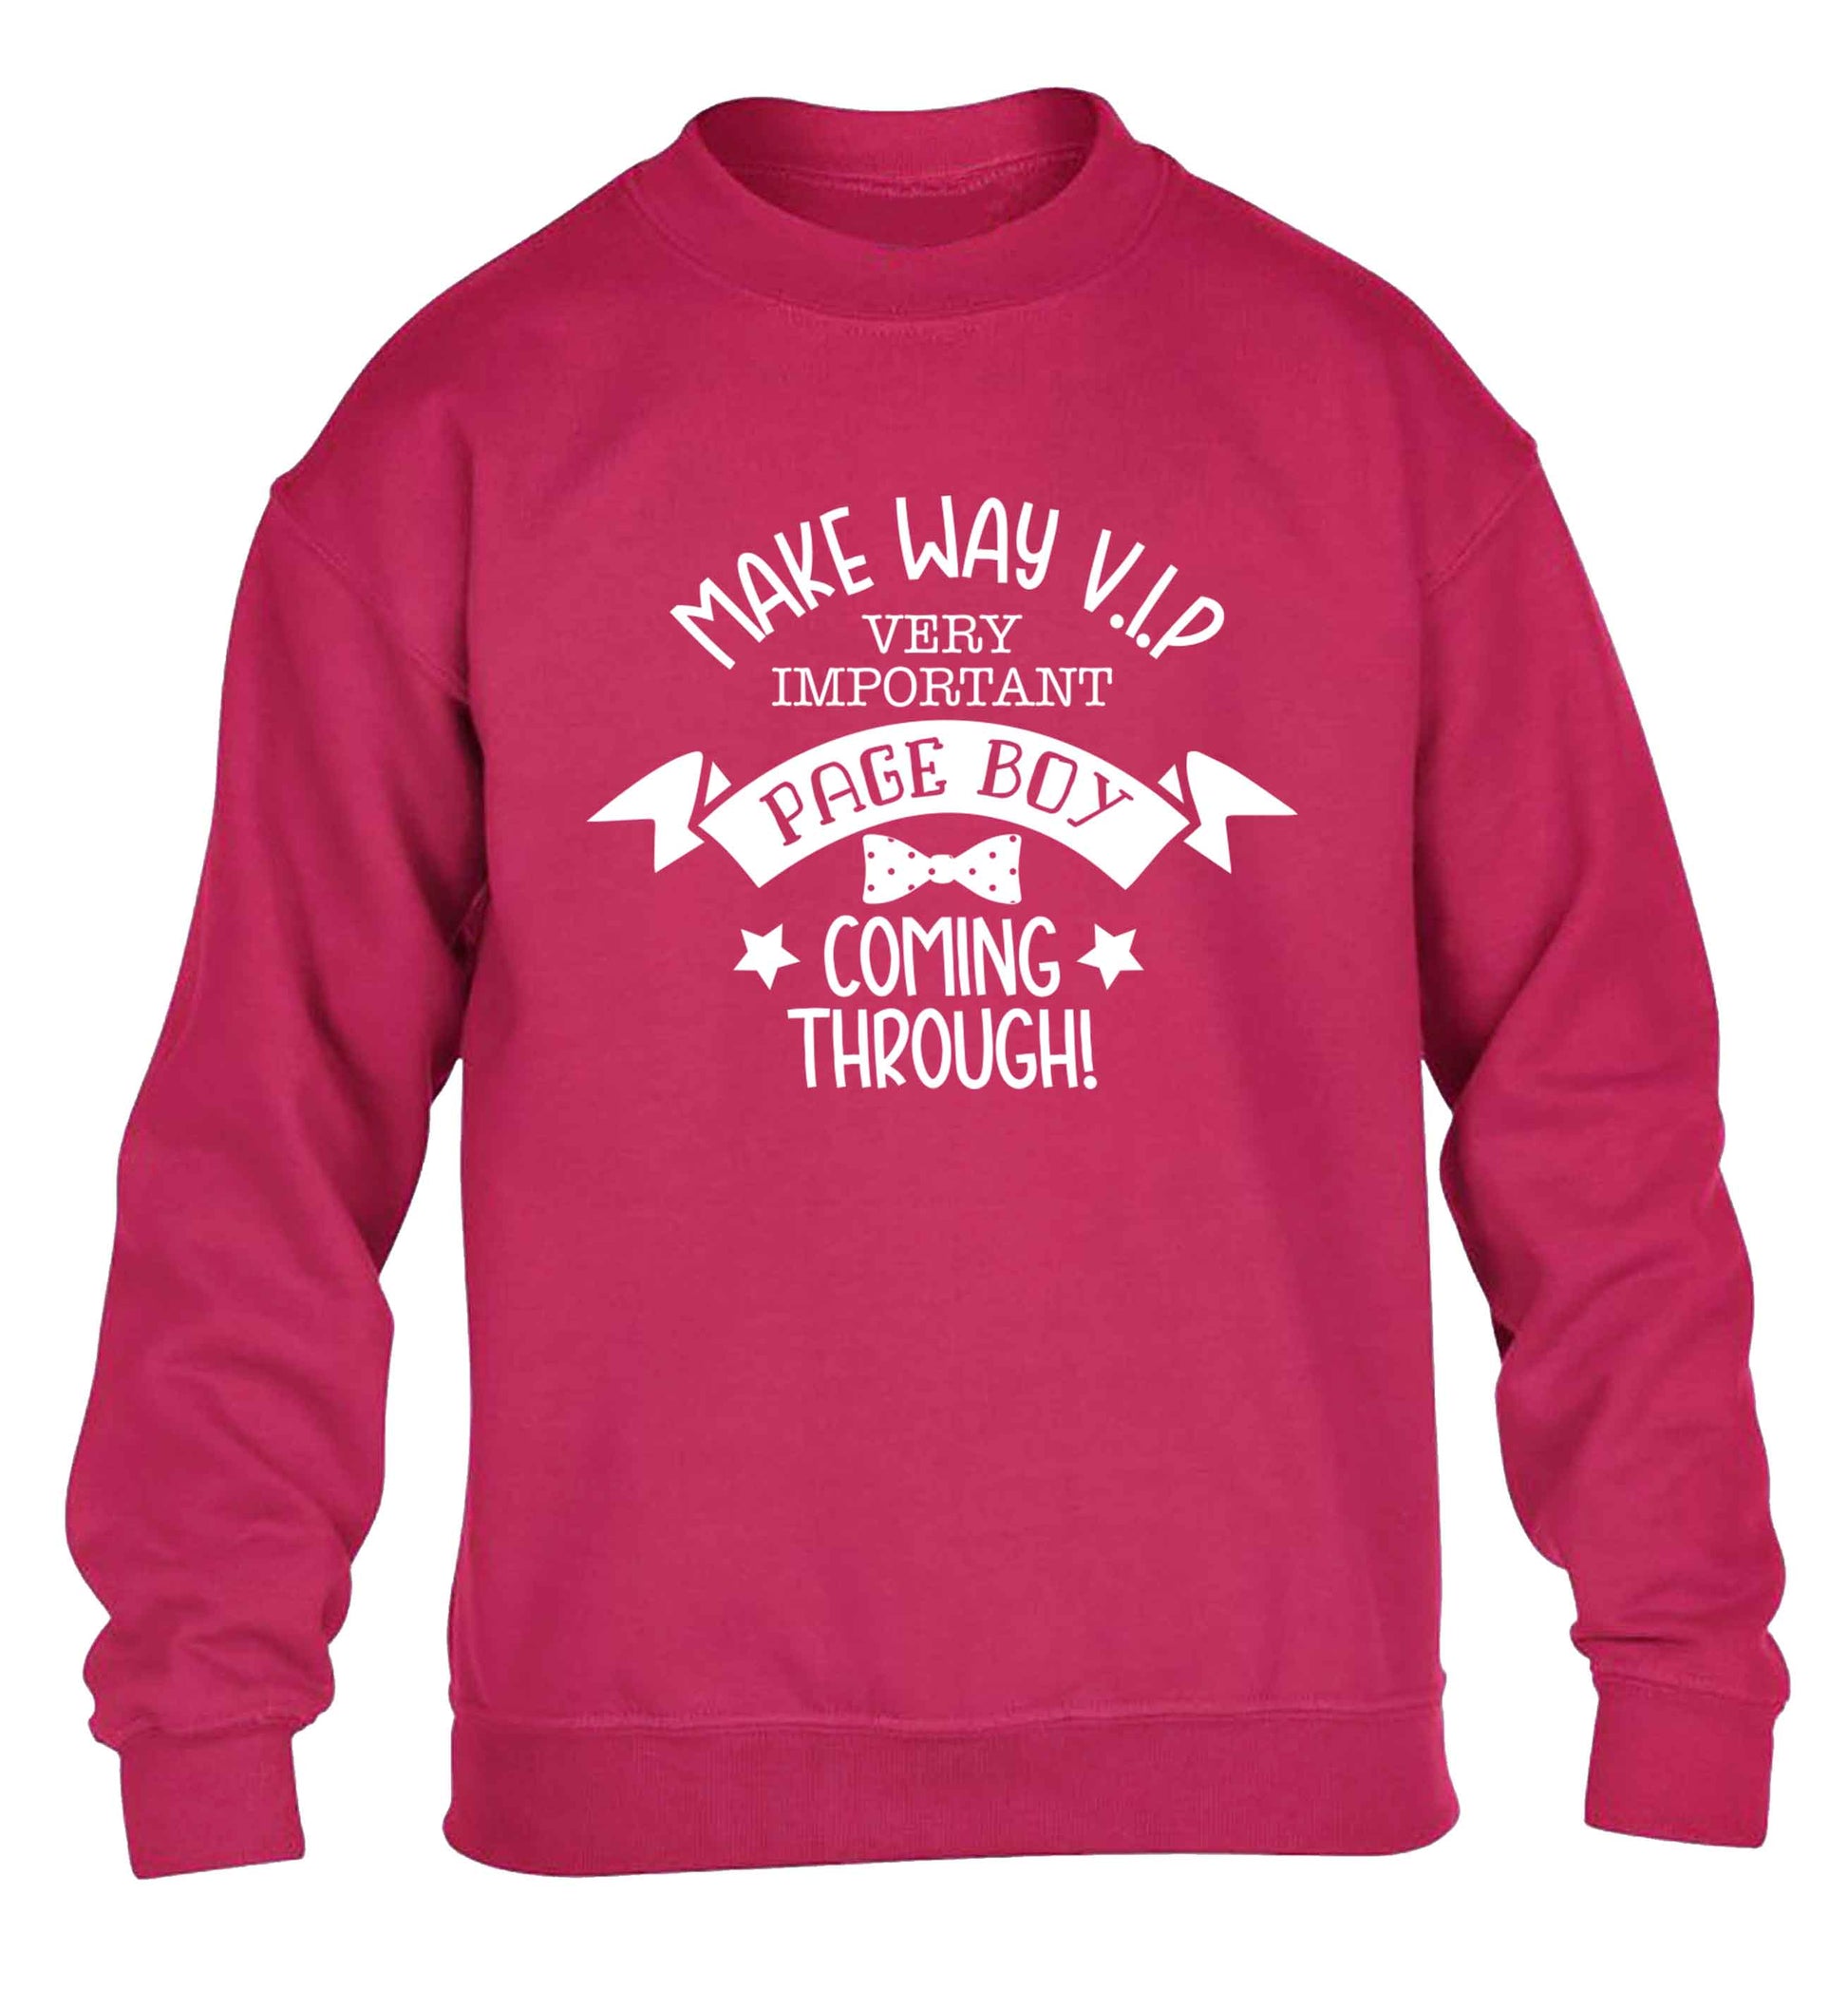 Make way V.I.P page boy coming through! children's pink sweater 12-13 Years